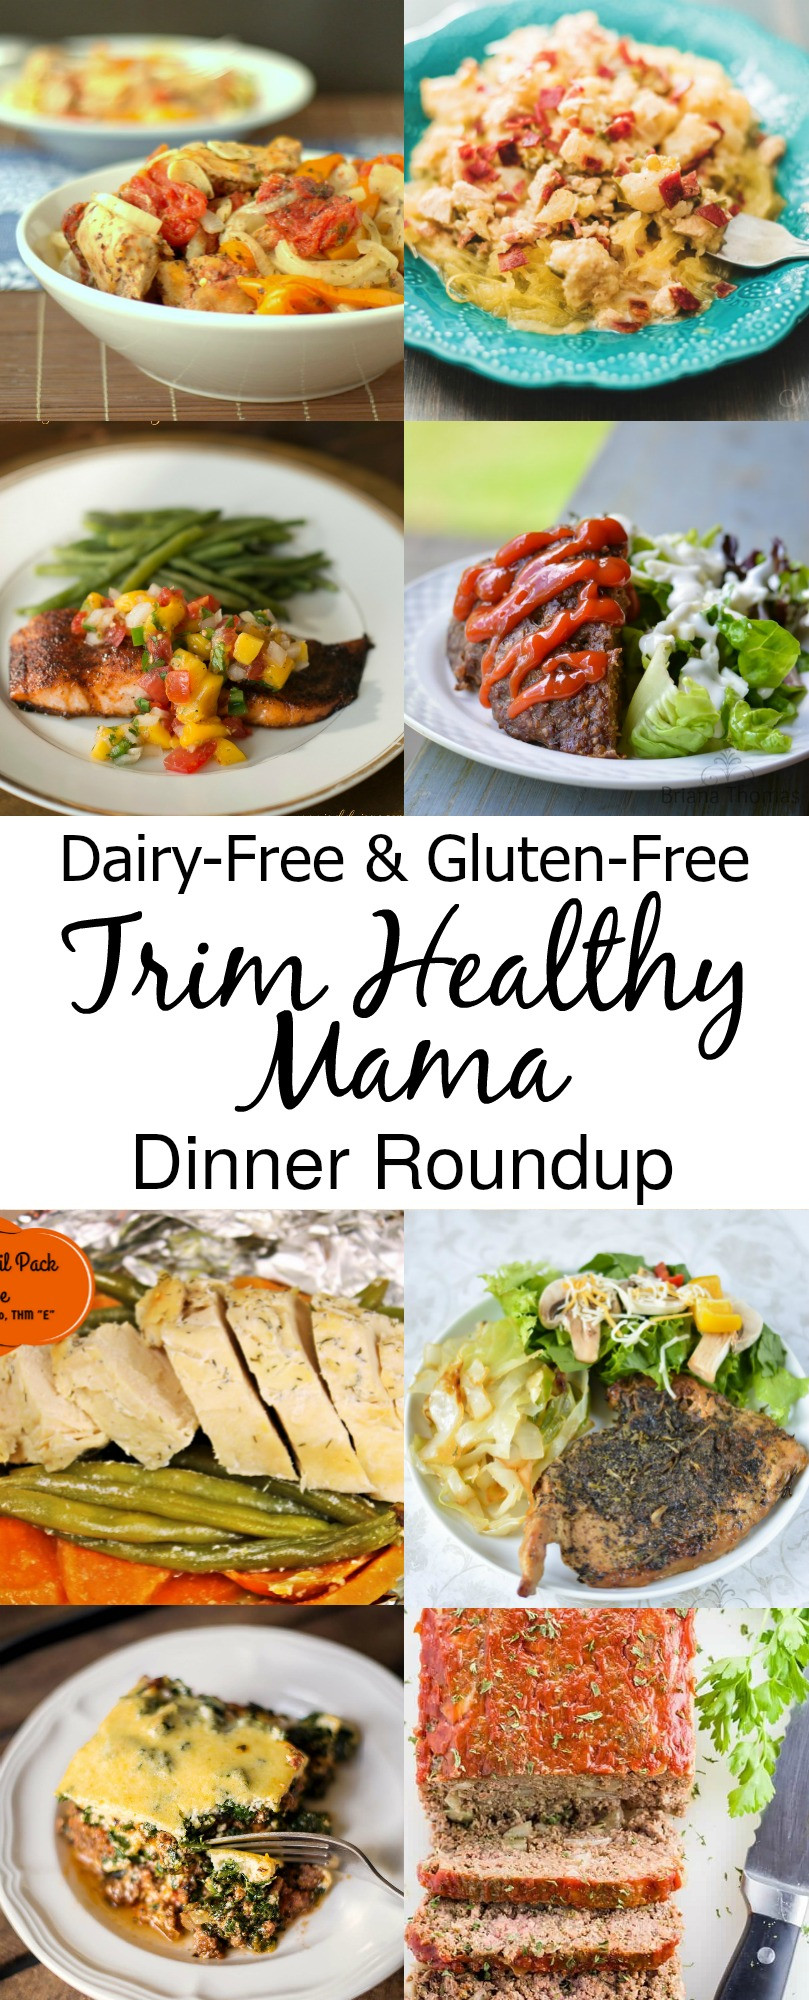 Gluten Free Dairy Free Dinner Recipes
 Dairy Free and Gluten Free Trim Healthy Mama Dinners